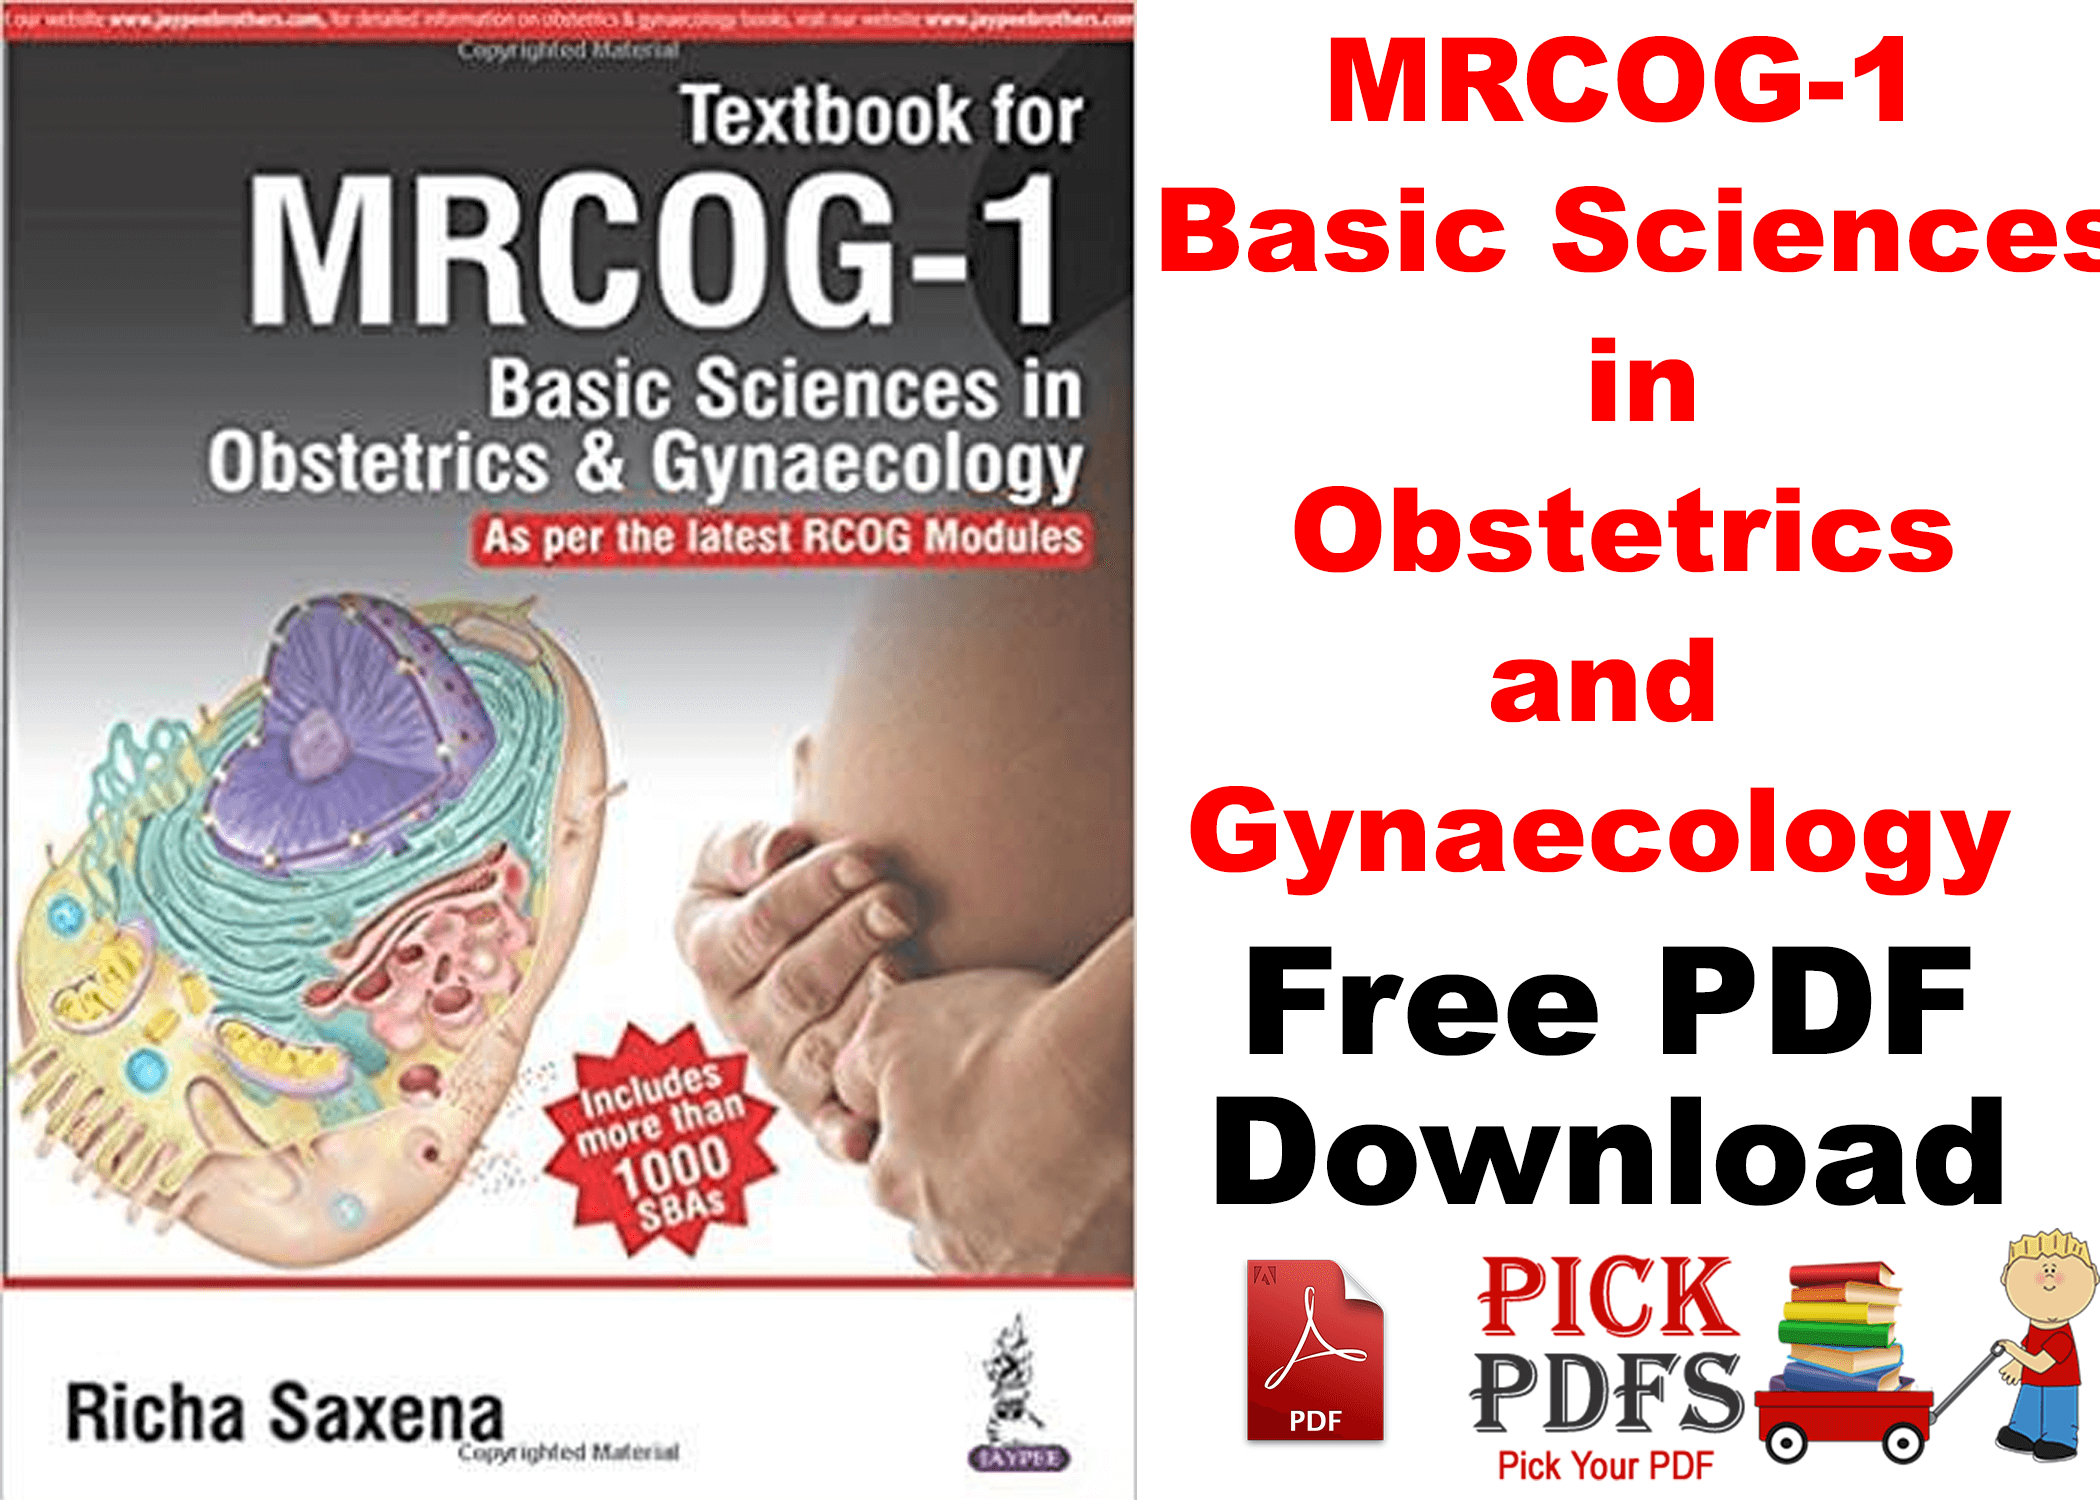 https://pickpdfs.com/download-telephone-triage-for-obstetrics-and-gynecology-3rd-edition-pdf-free/